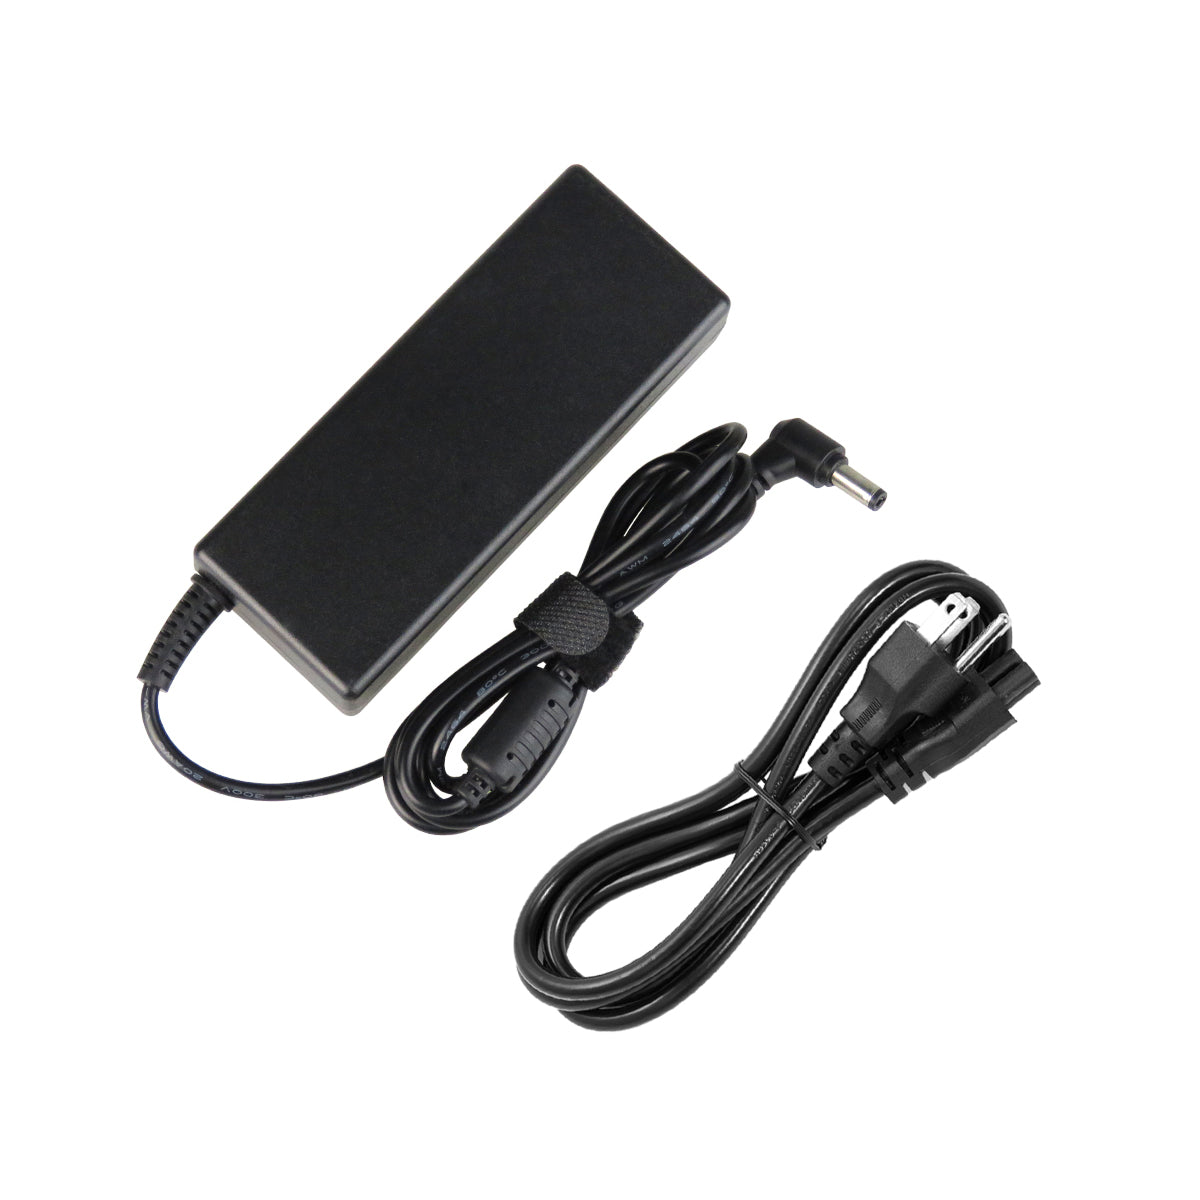 AC Adapter Charger for ASUS K73 Notebook.